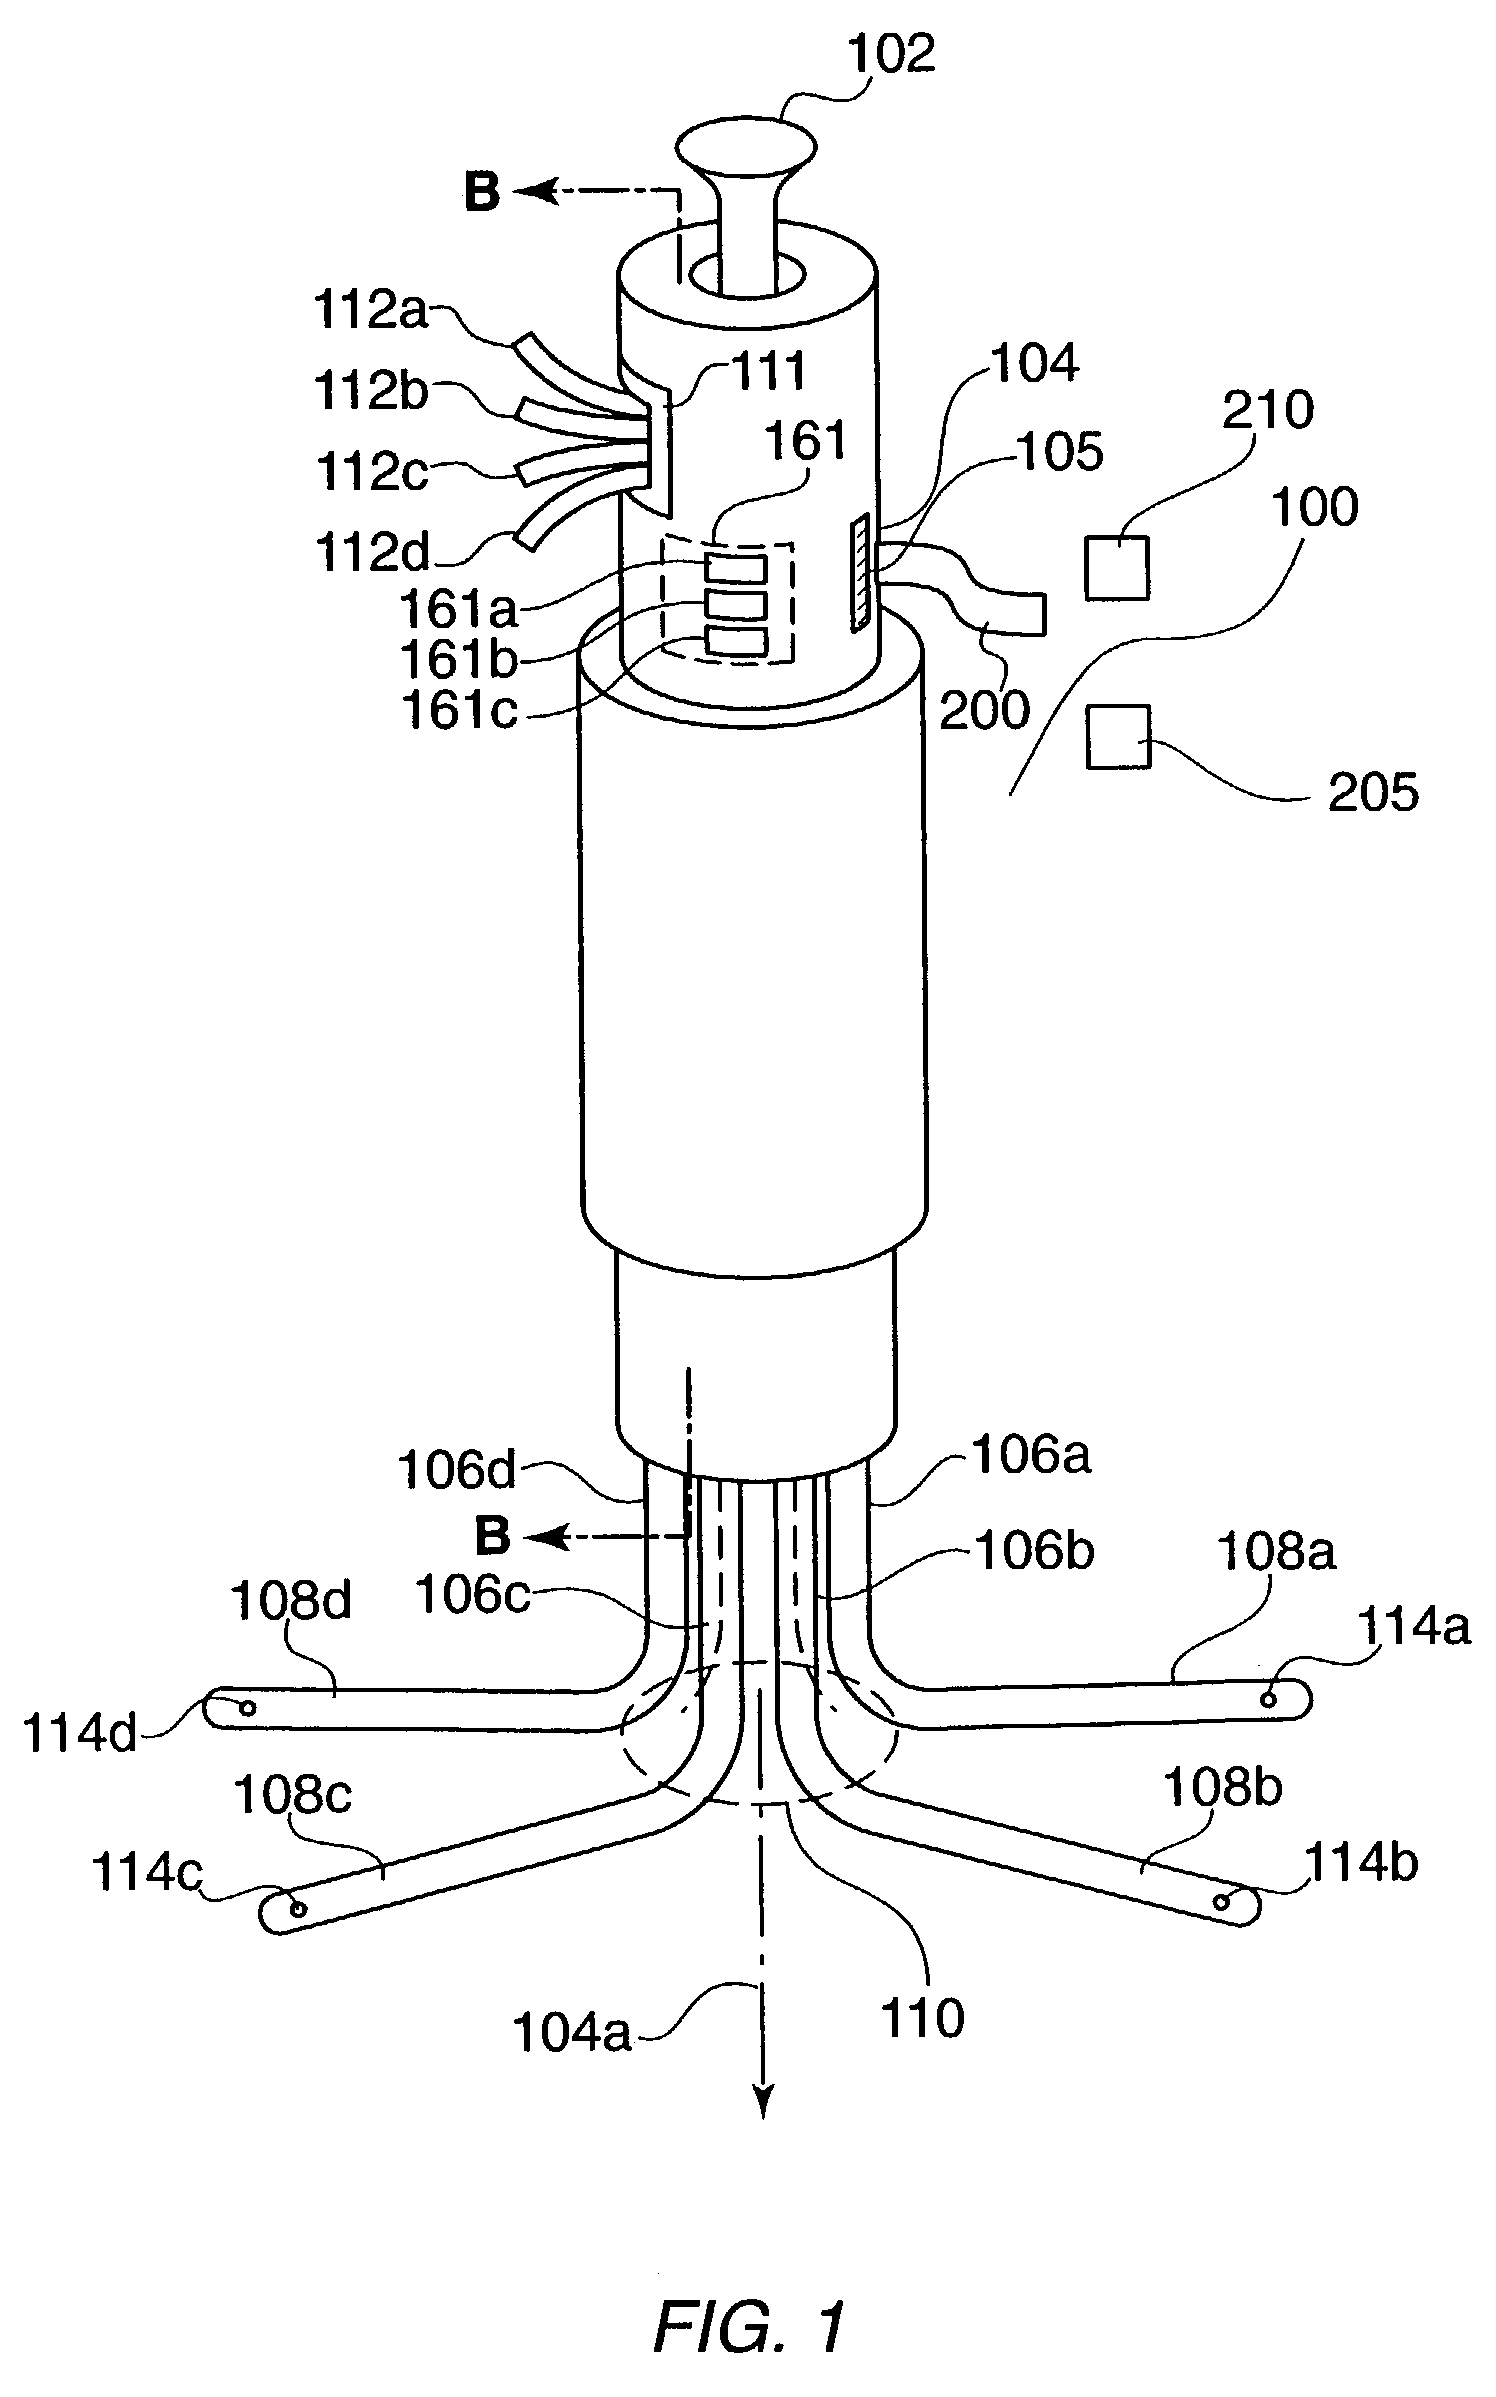 Surgical imaging device